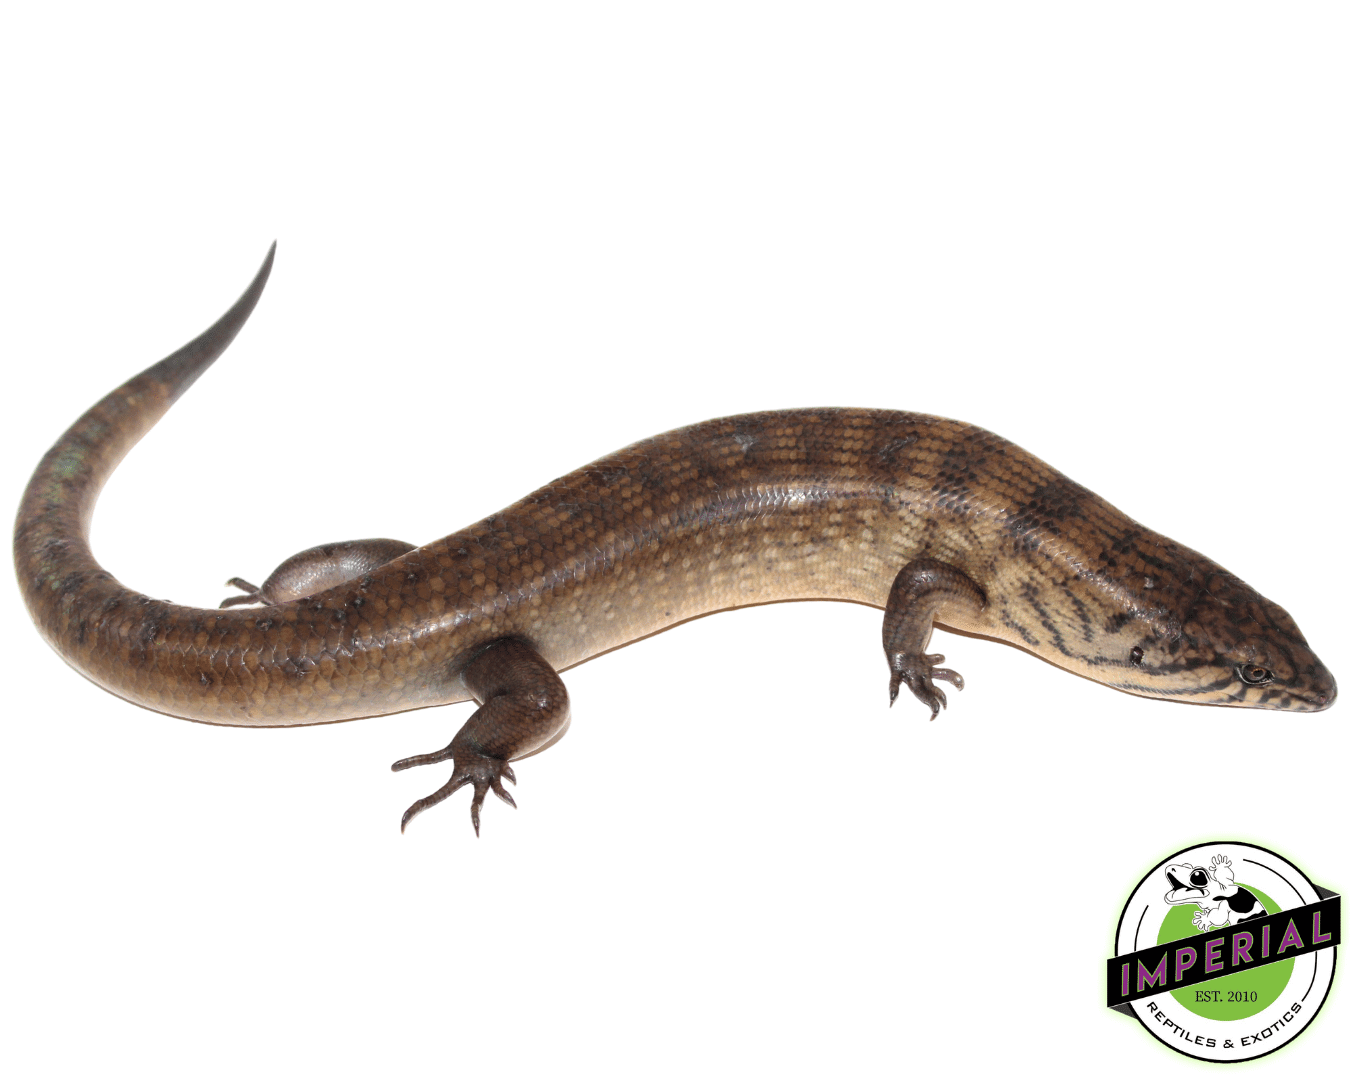 skink for sale, buy reptiles online